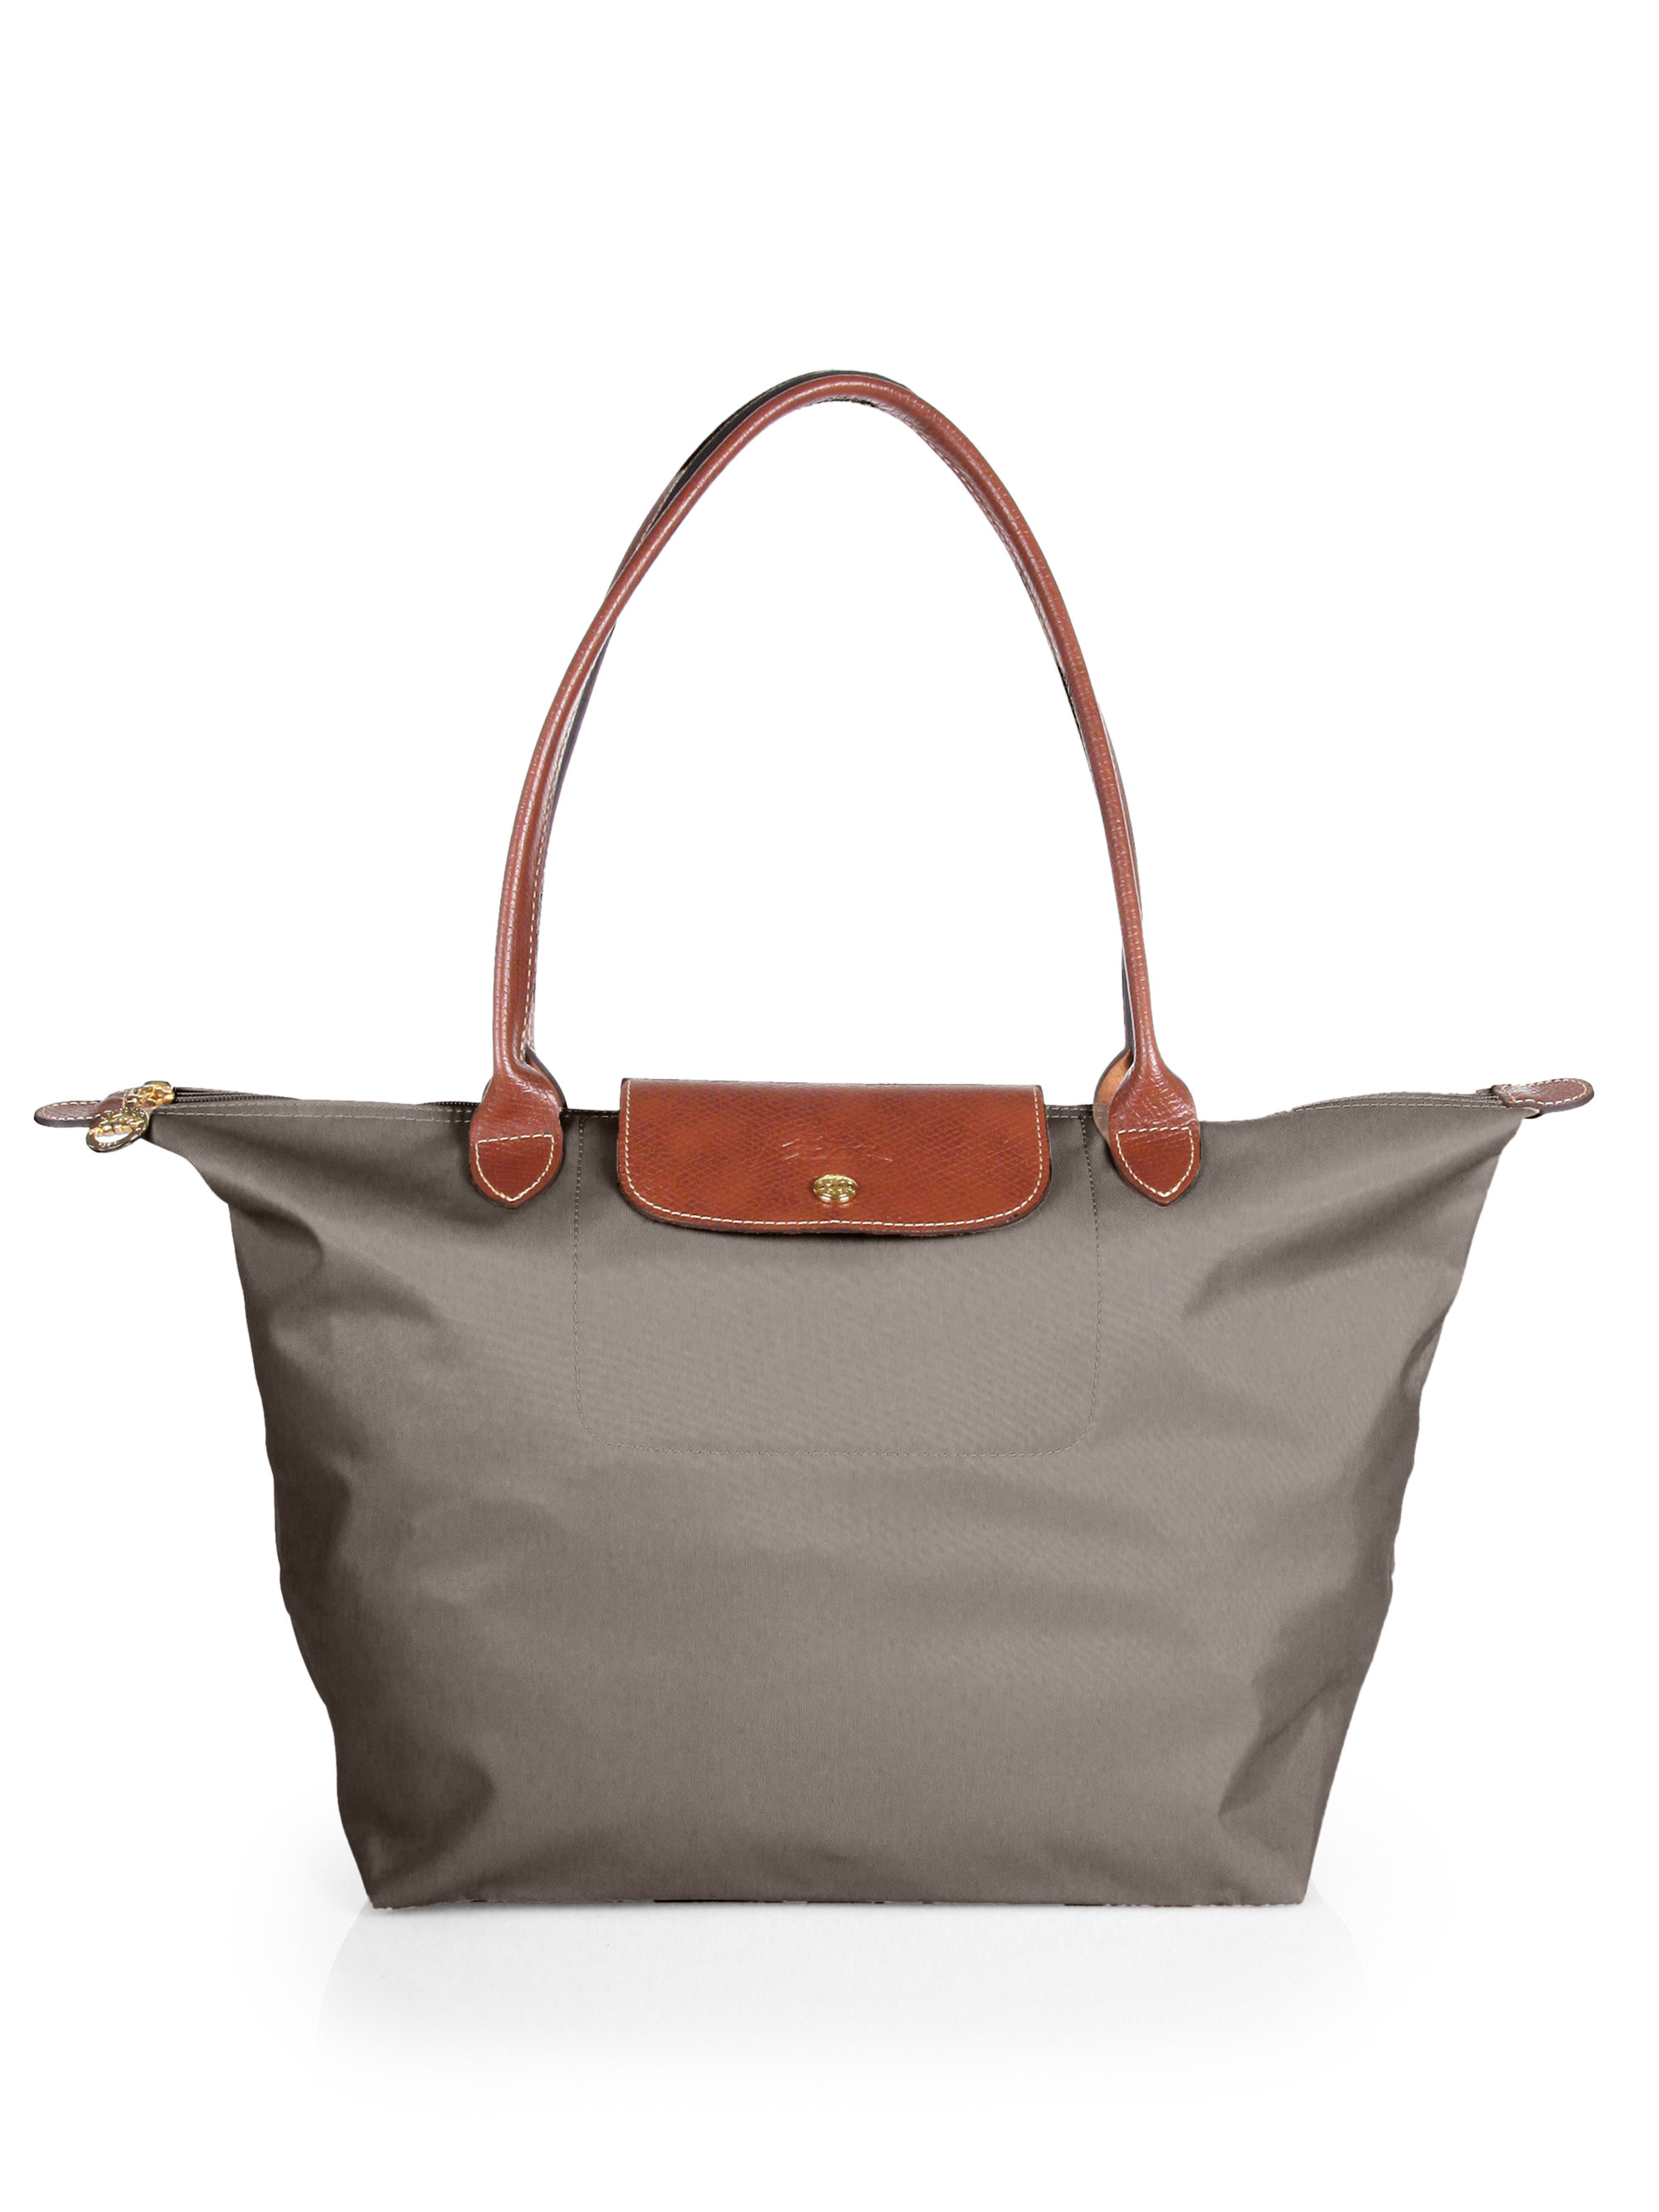 Longchamp Le Pliage Shoulder Tote in Gray (CLAY) | Lyst